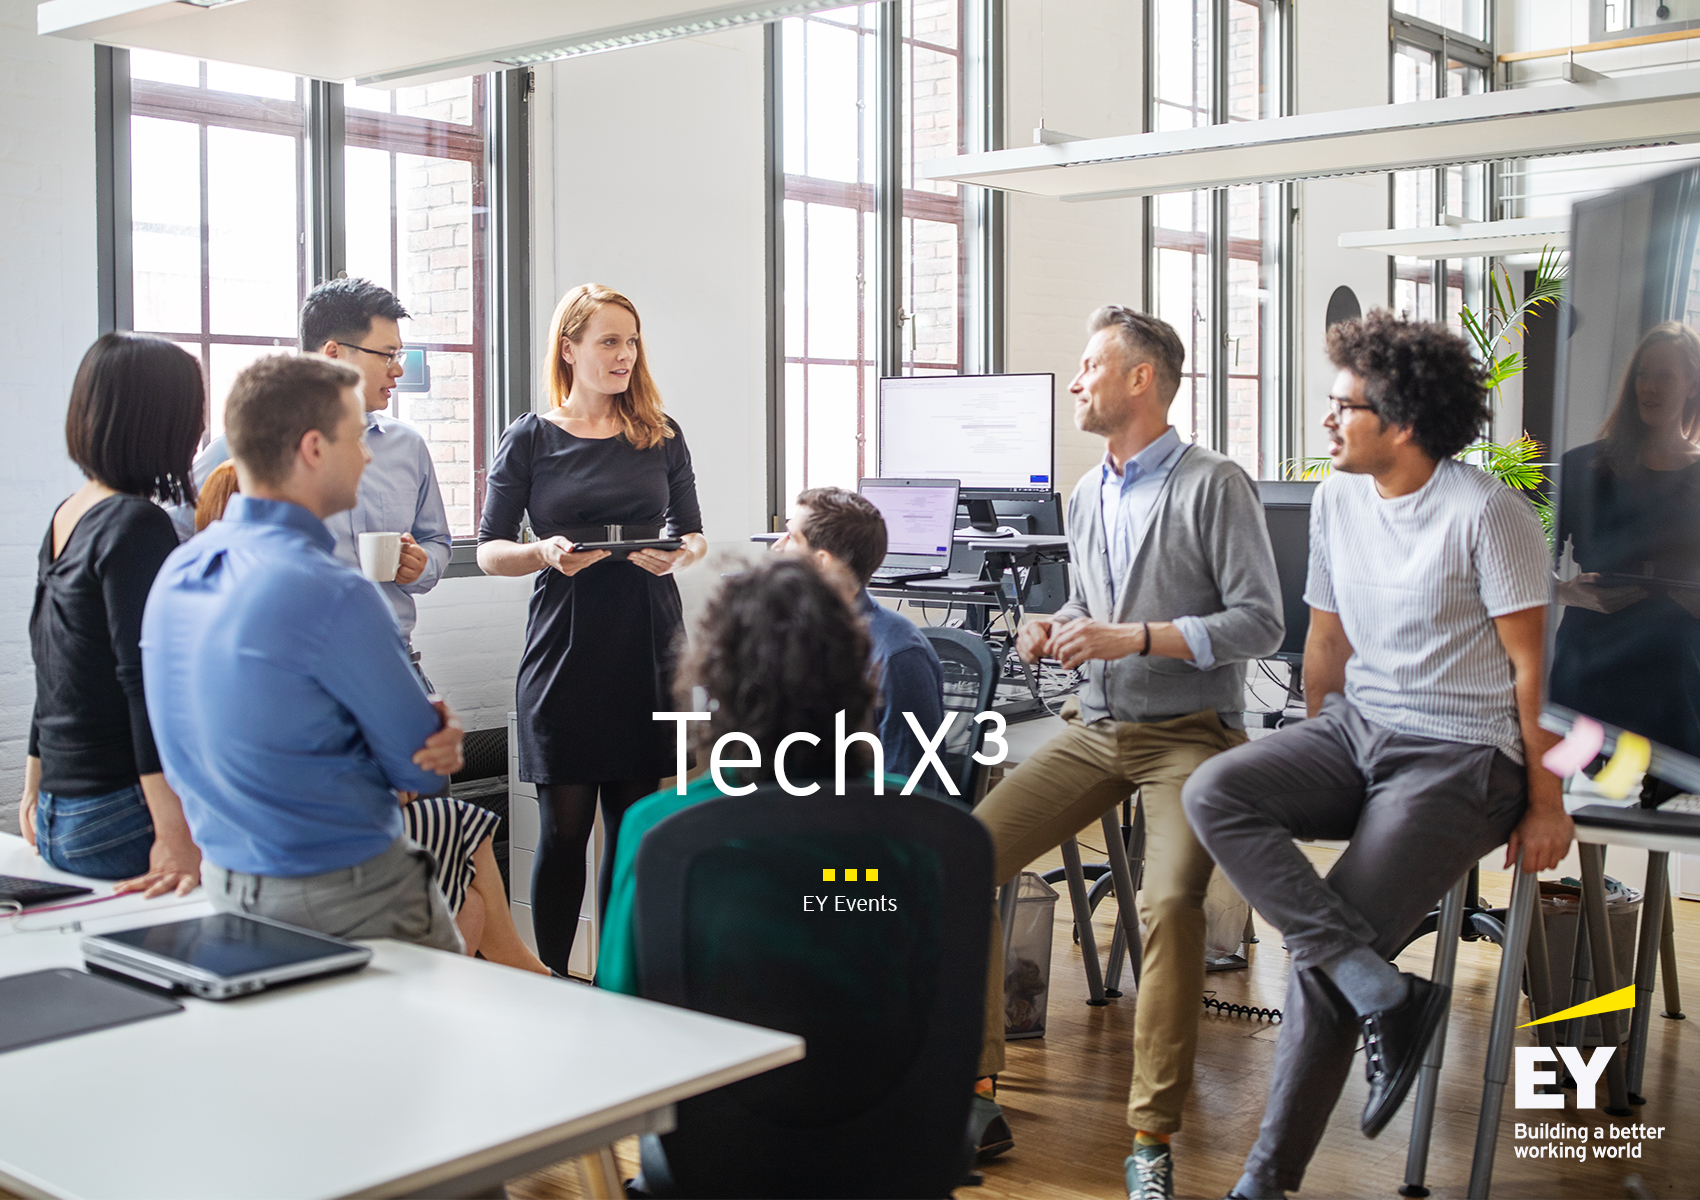 Karriere-Event TechX3 – Technology Consulting 